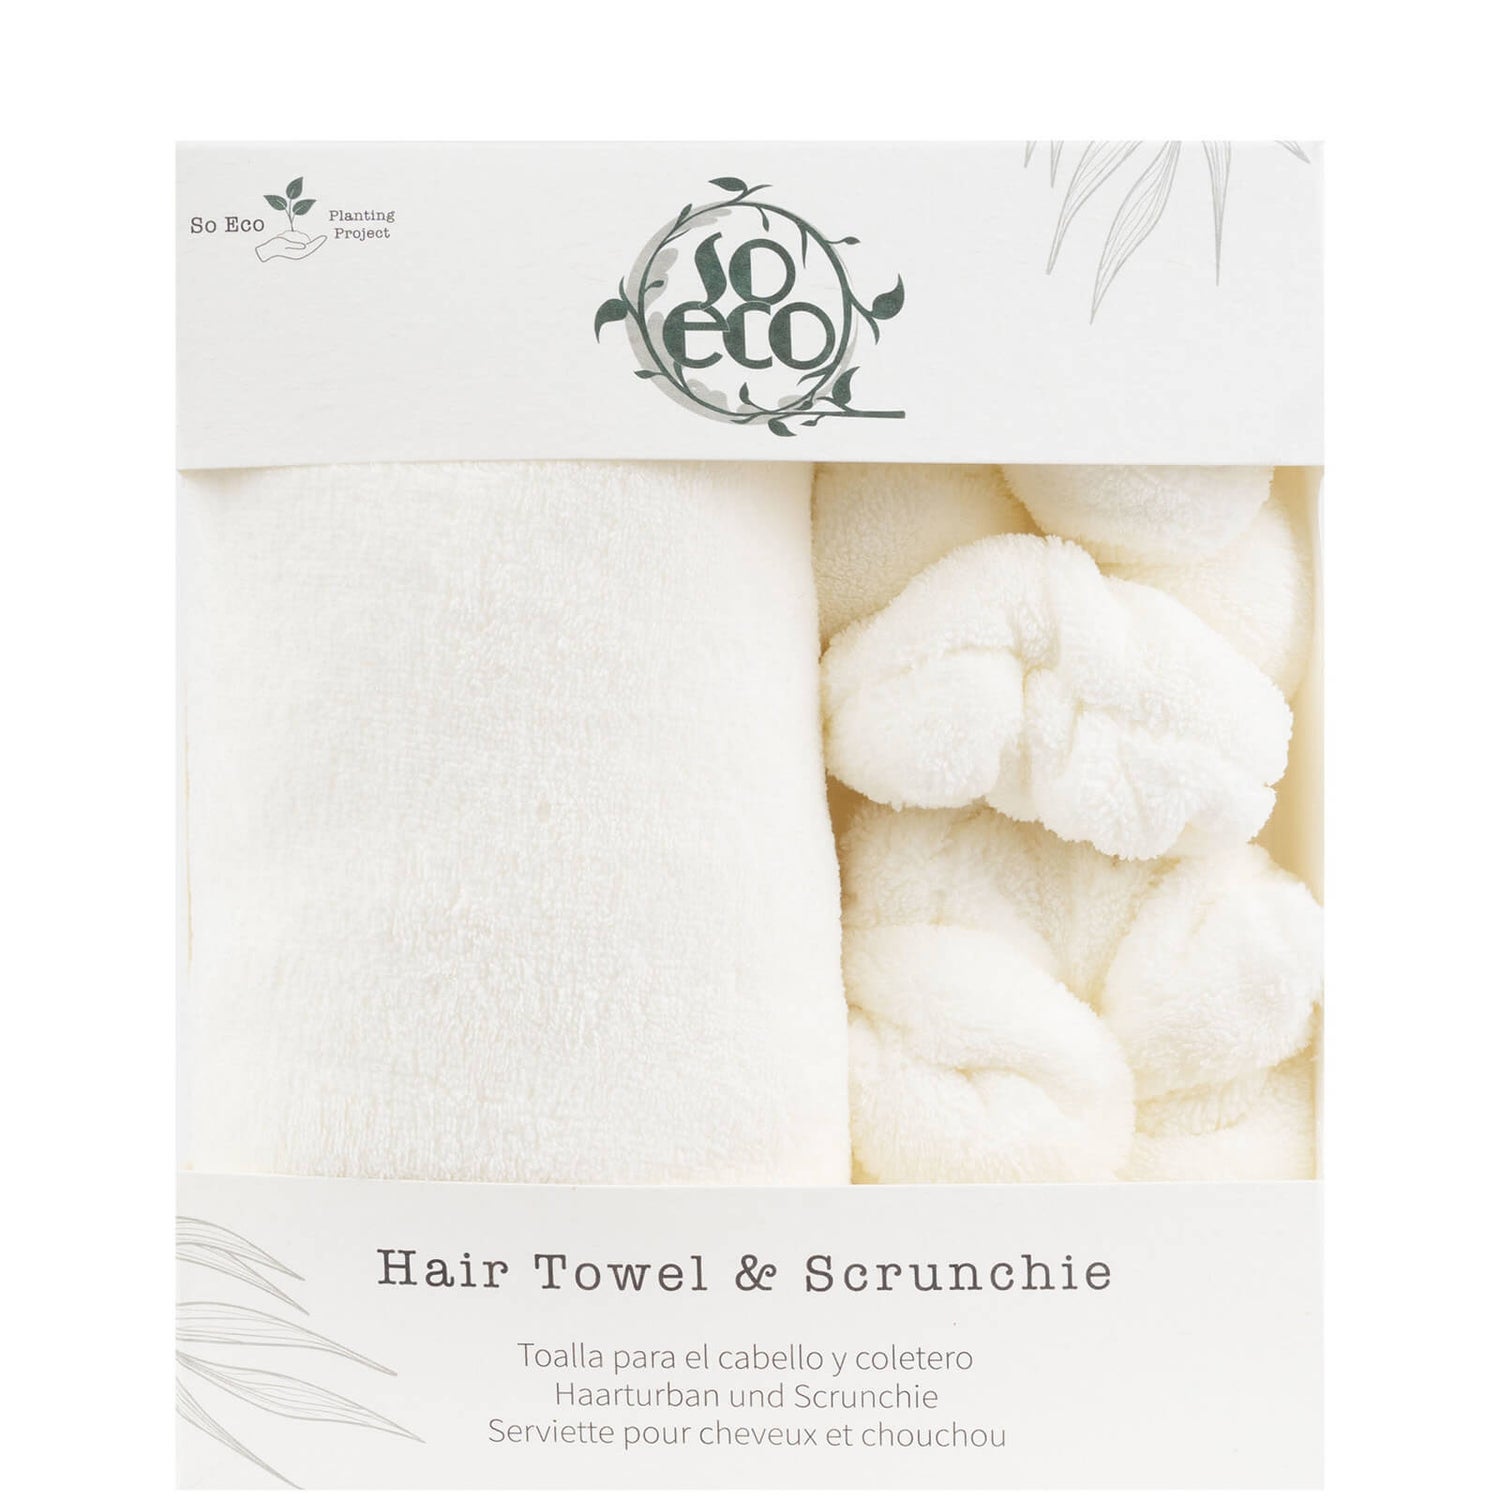 So Eco Bamboo Scrunchie and Hair Towel